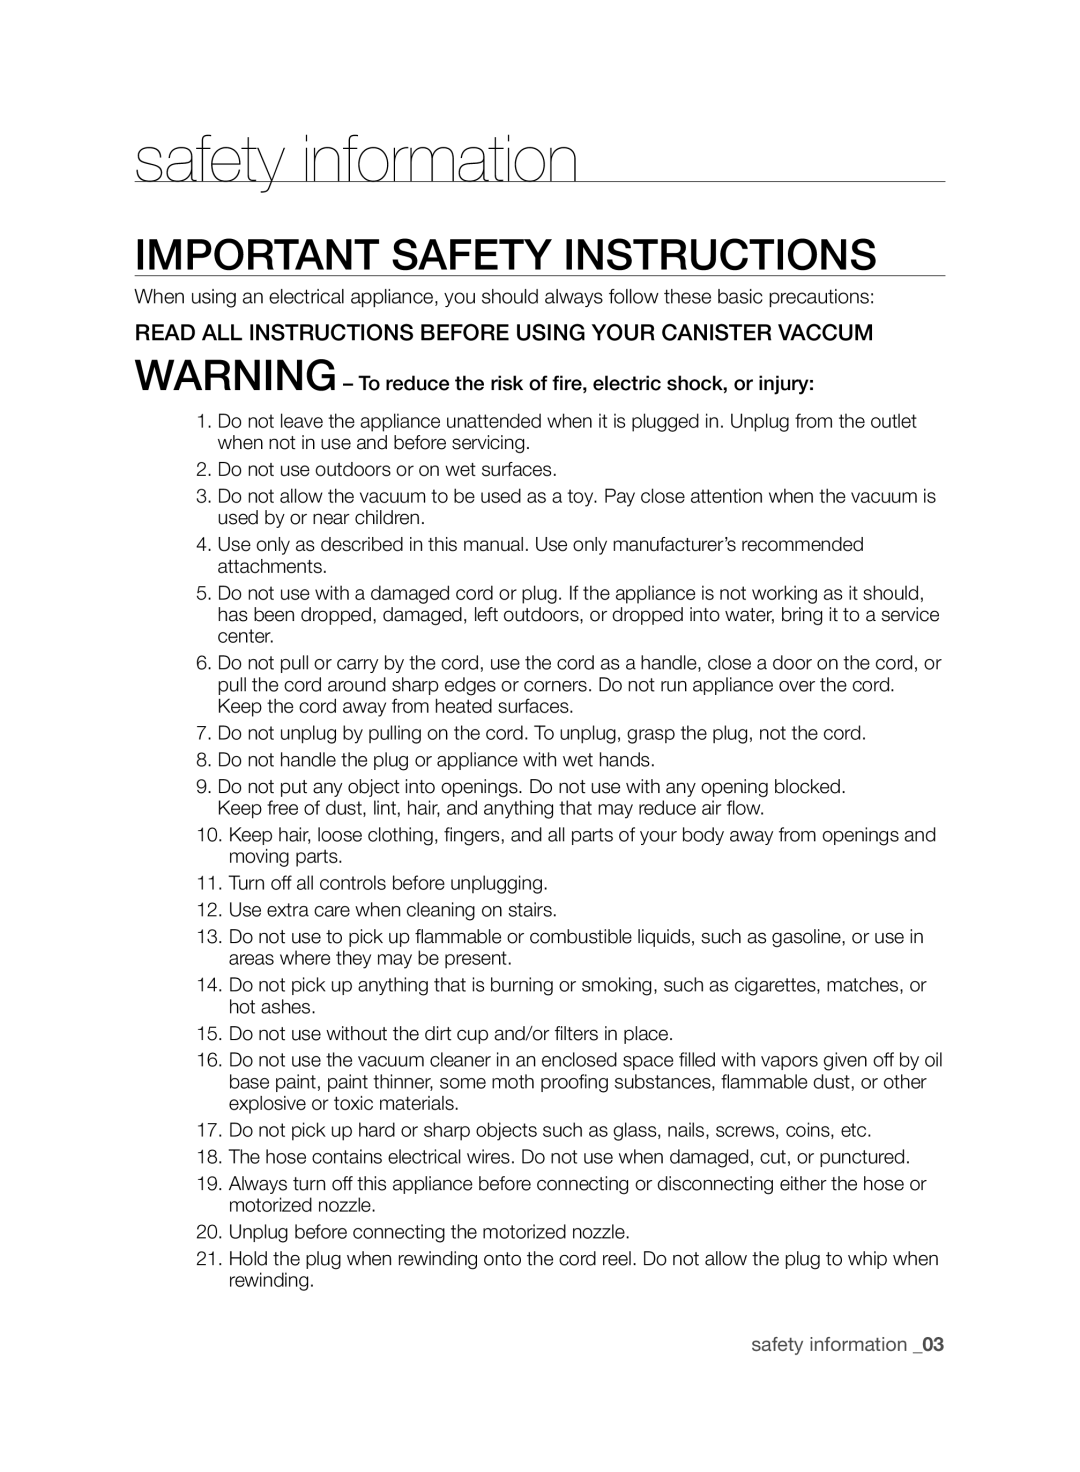 Samsung VCC96P0H1G user manual Important Safety Instructions, safety information _03 